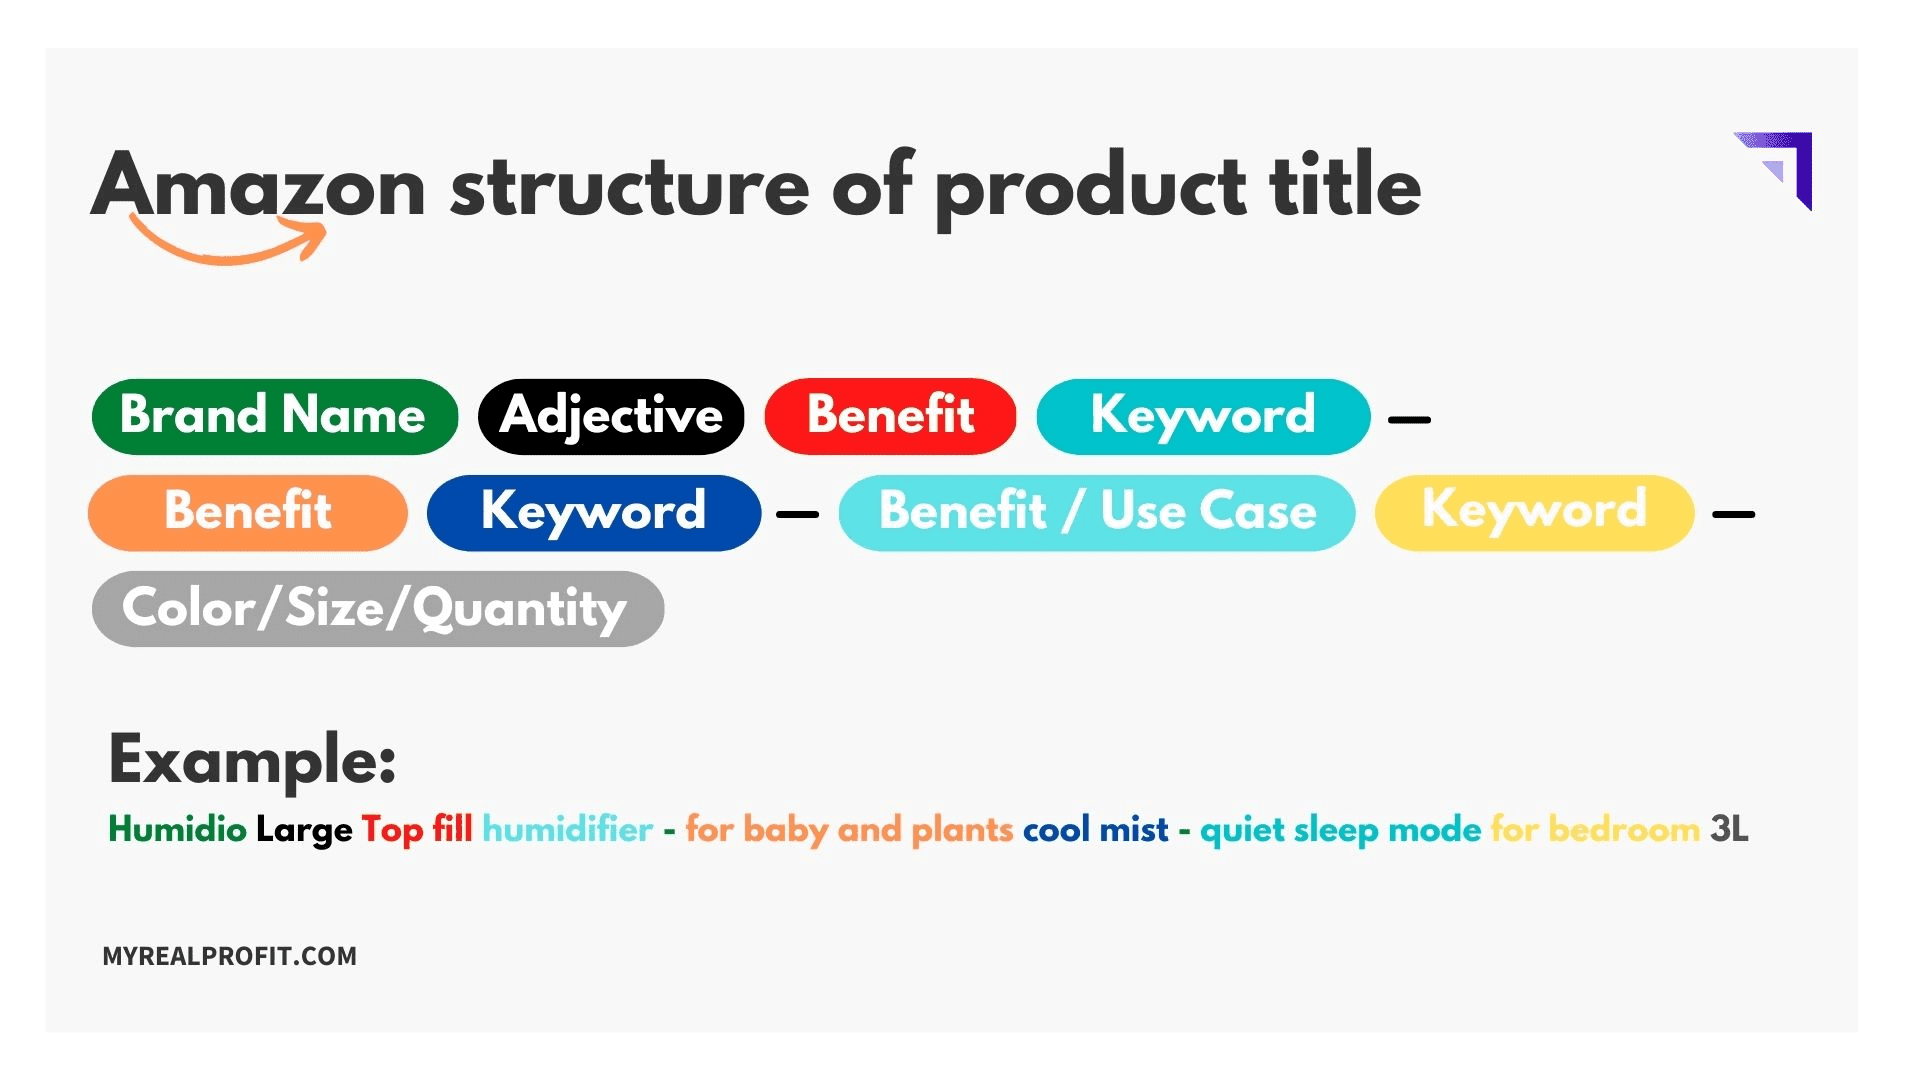 Amazon structure of product title